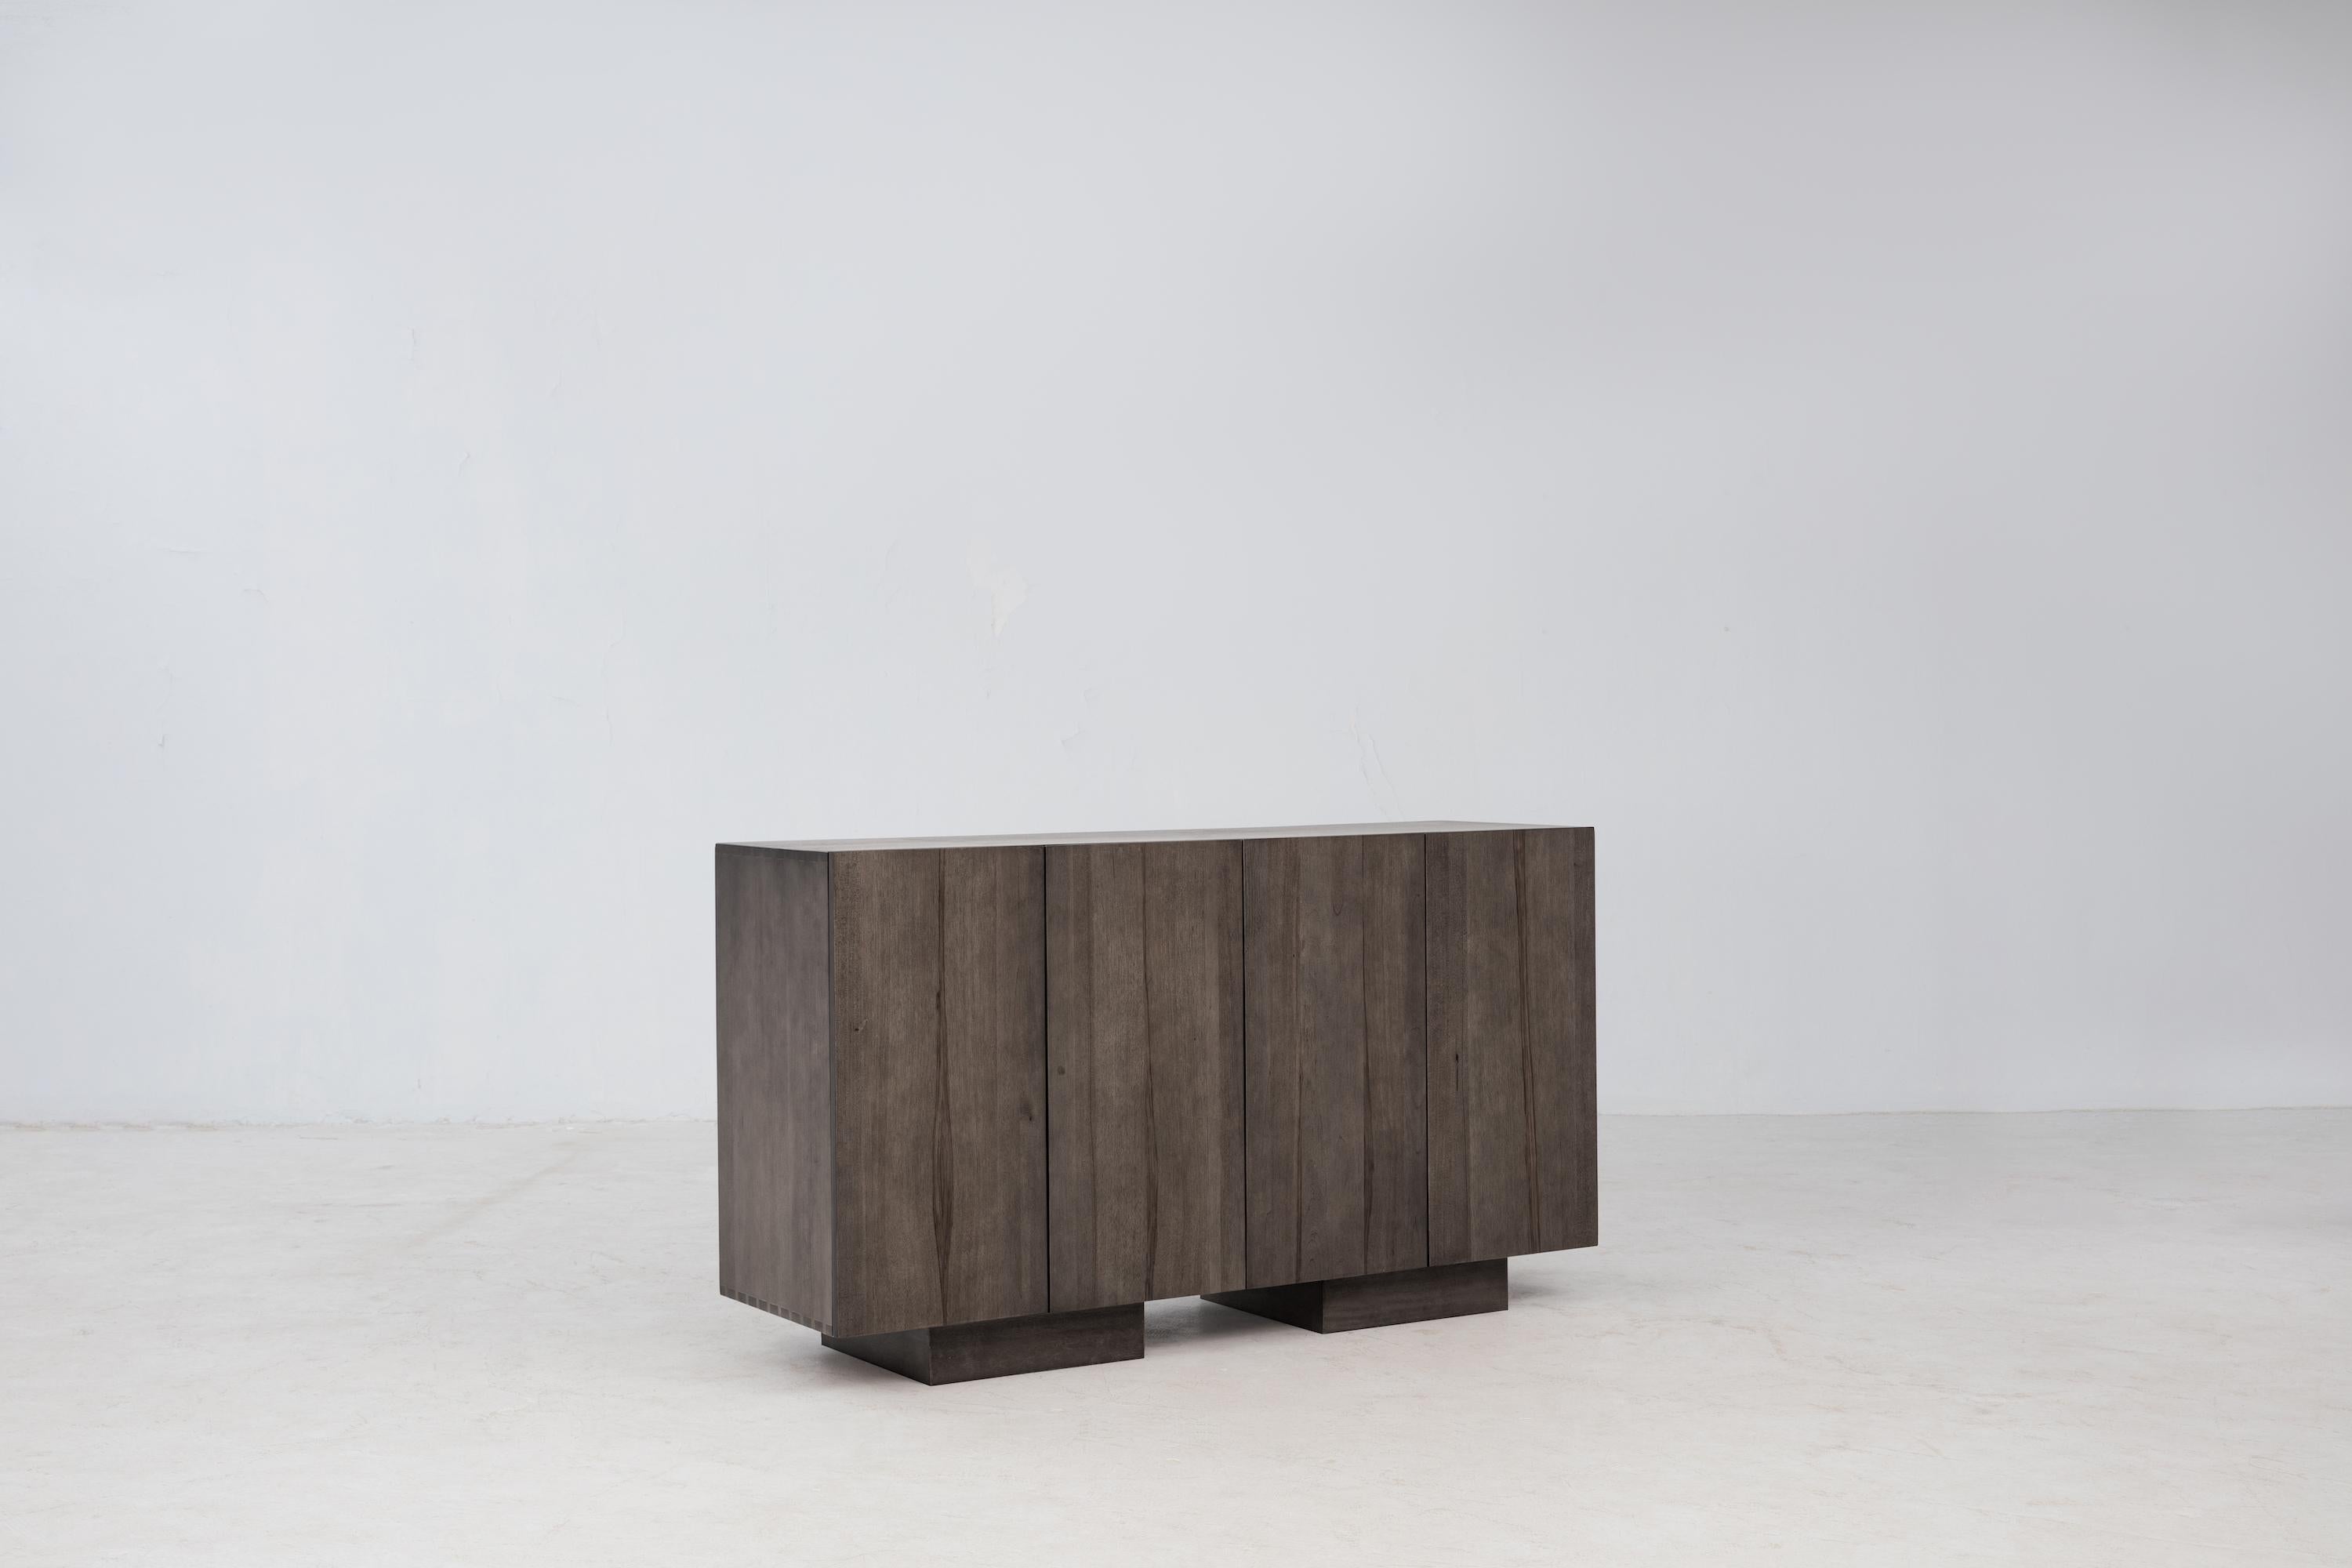 The Wolo Sideboard focuses on the beautiful grain and natural characteristics of Makata Wood, with solid front panels that emphasize the beautiful contrasting grains, color, and natural characteristics of Makata, along with a luminescent sheen that